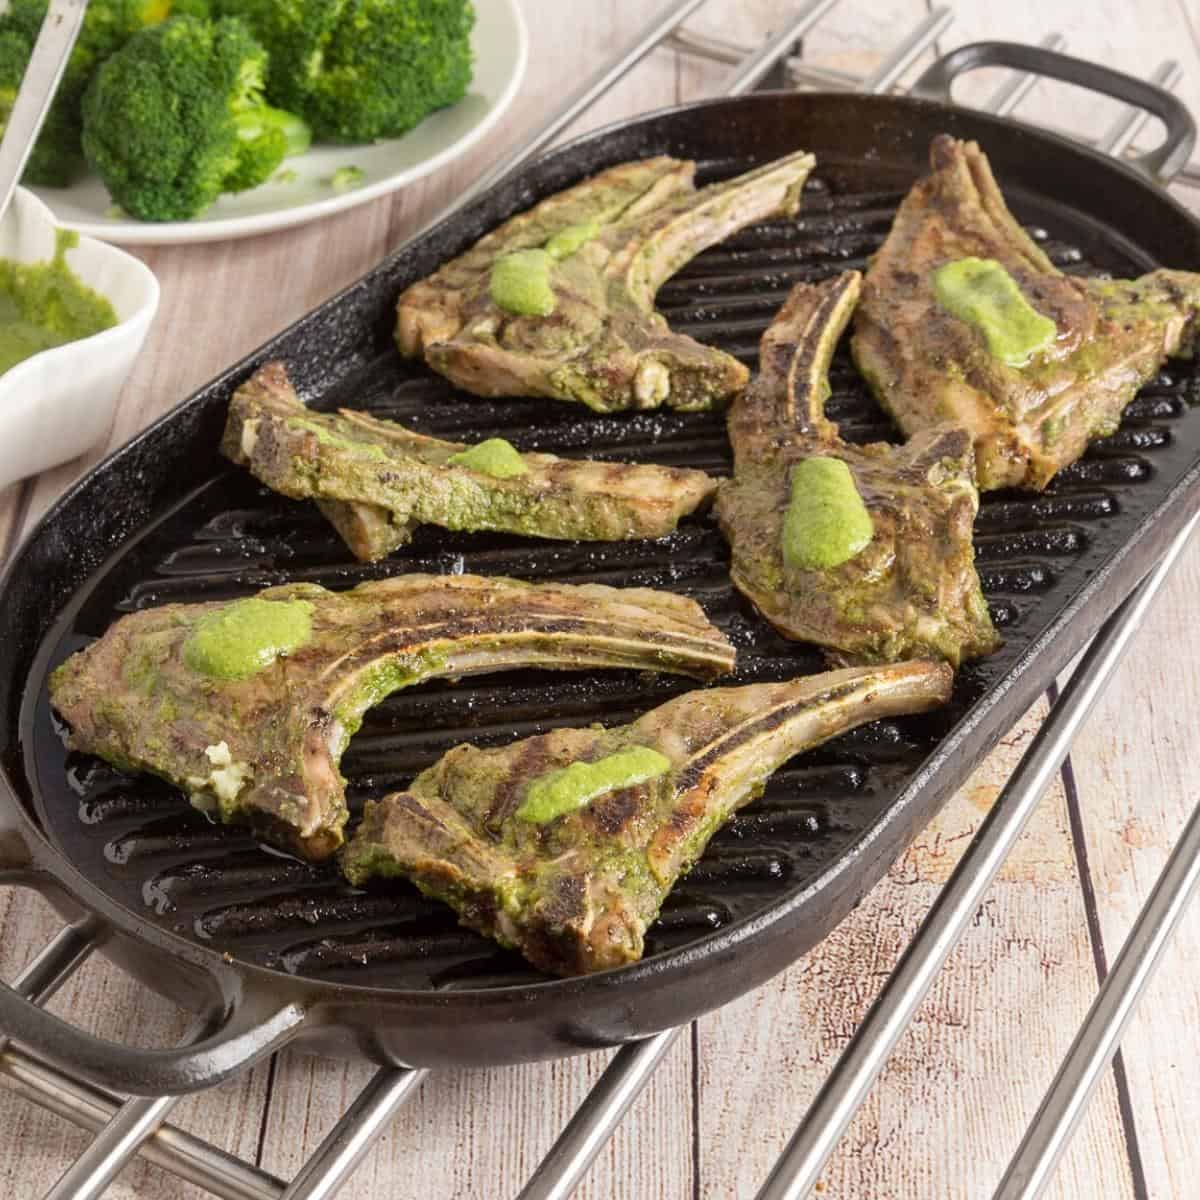 A grill with lamb chops.